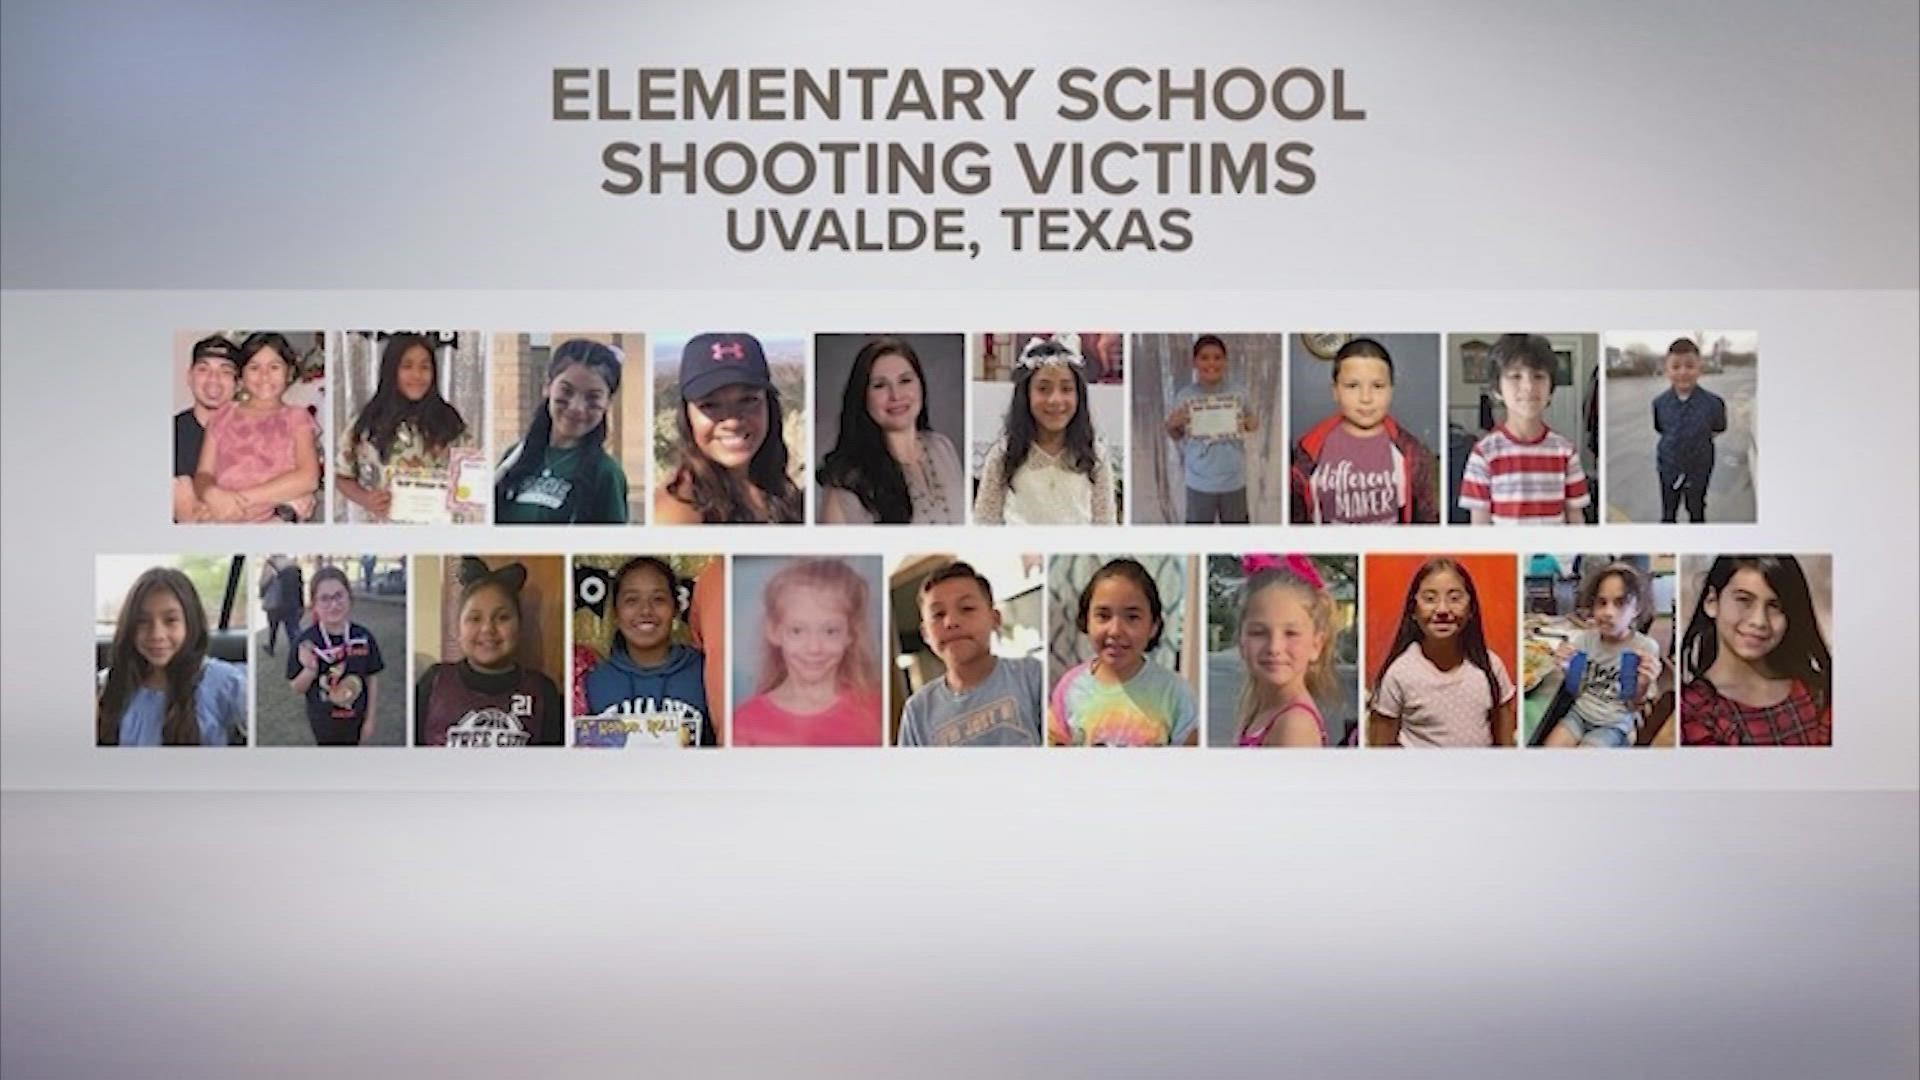 Even though school is out for the summer, districts have been working to prevent another tragedy.